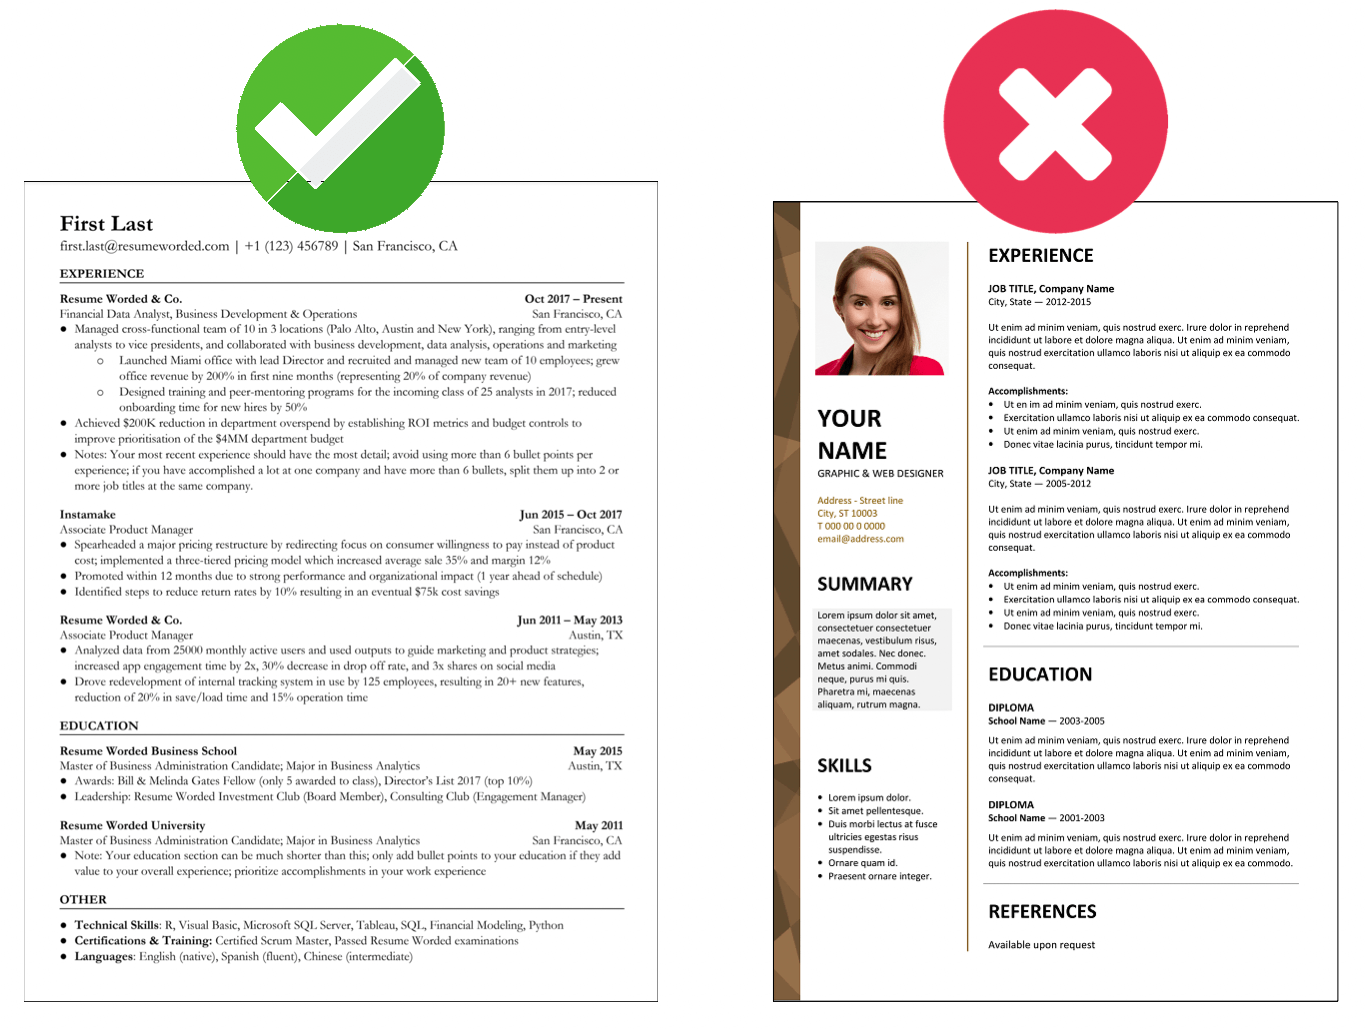 resume Changes: 5 Actionable Tips